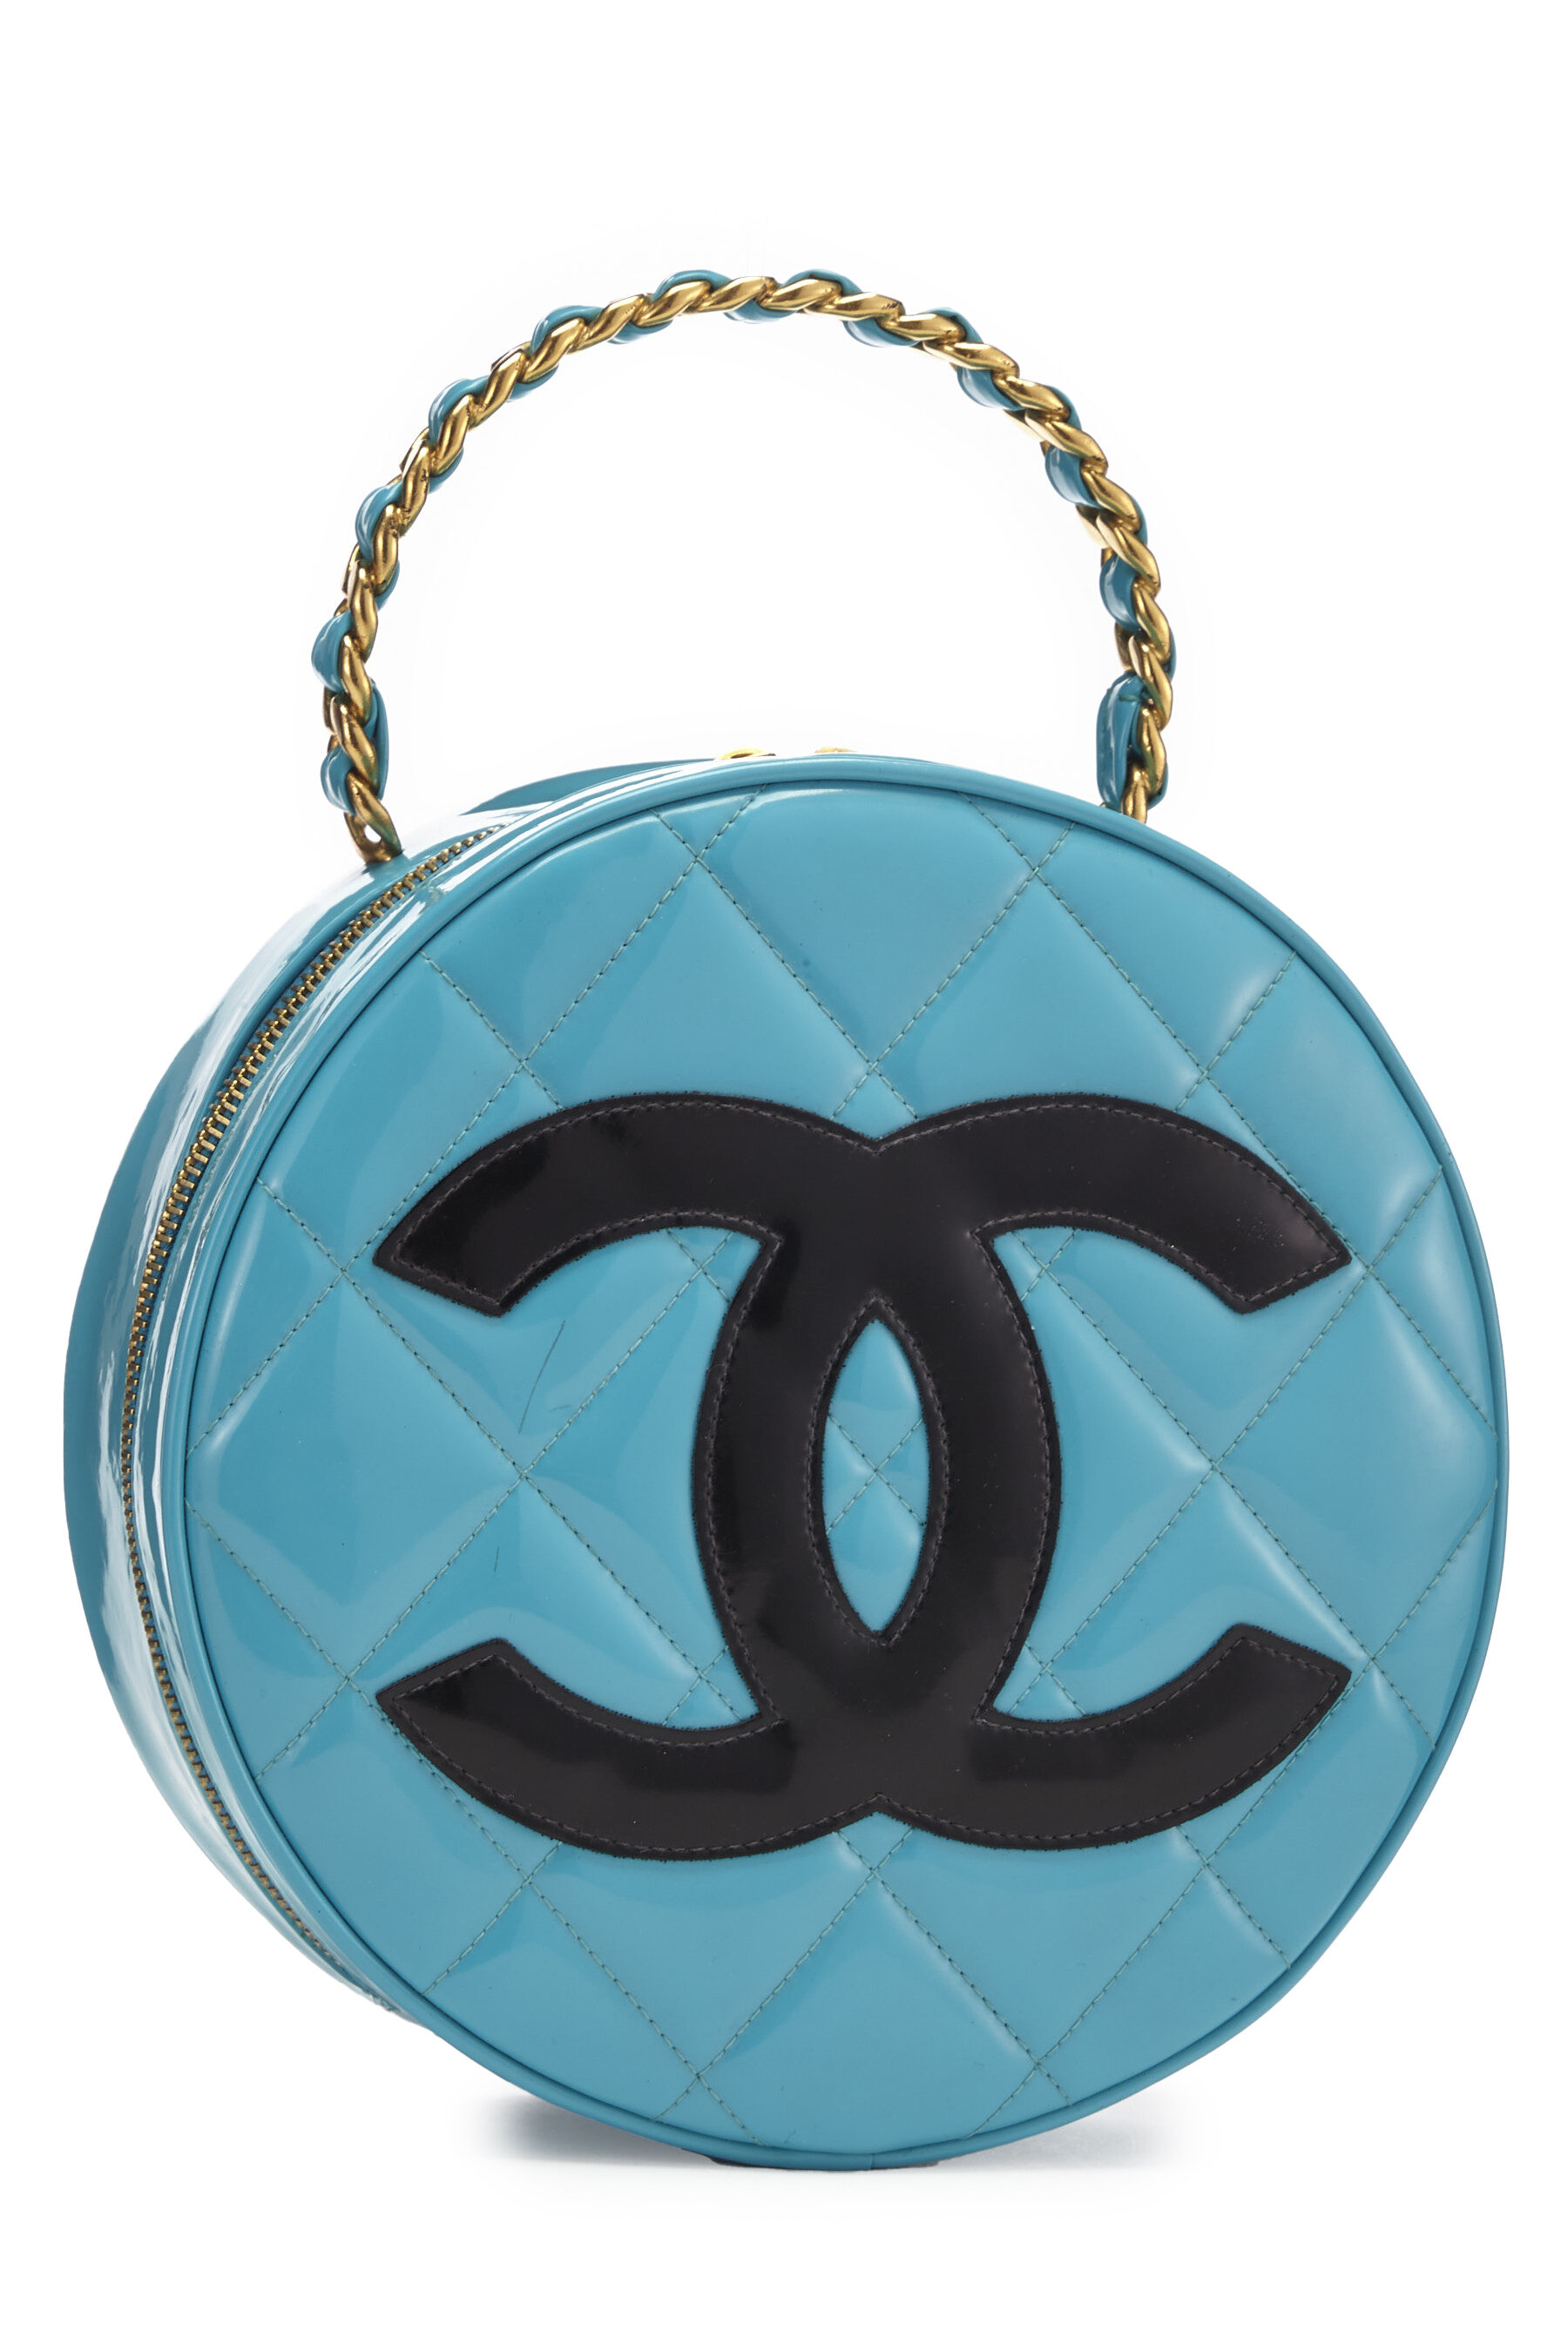 Chanel - Blue Quilted Patent Leather Round 'CC' Bag